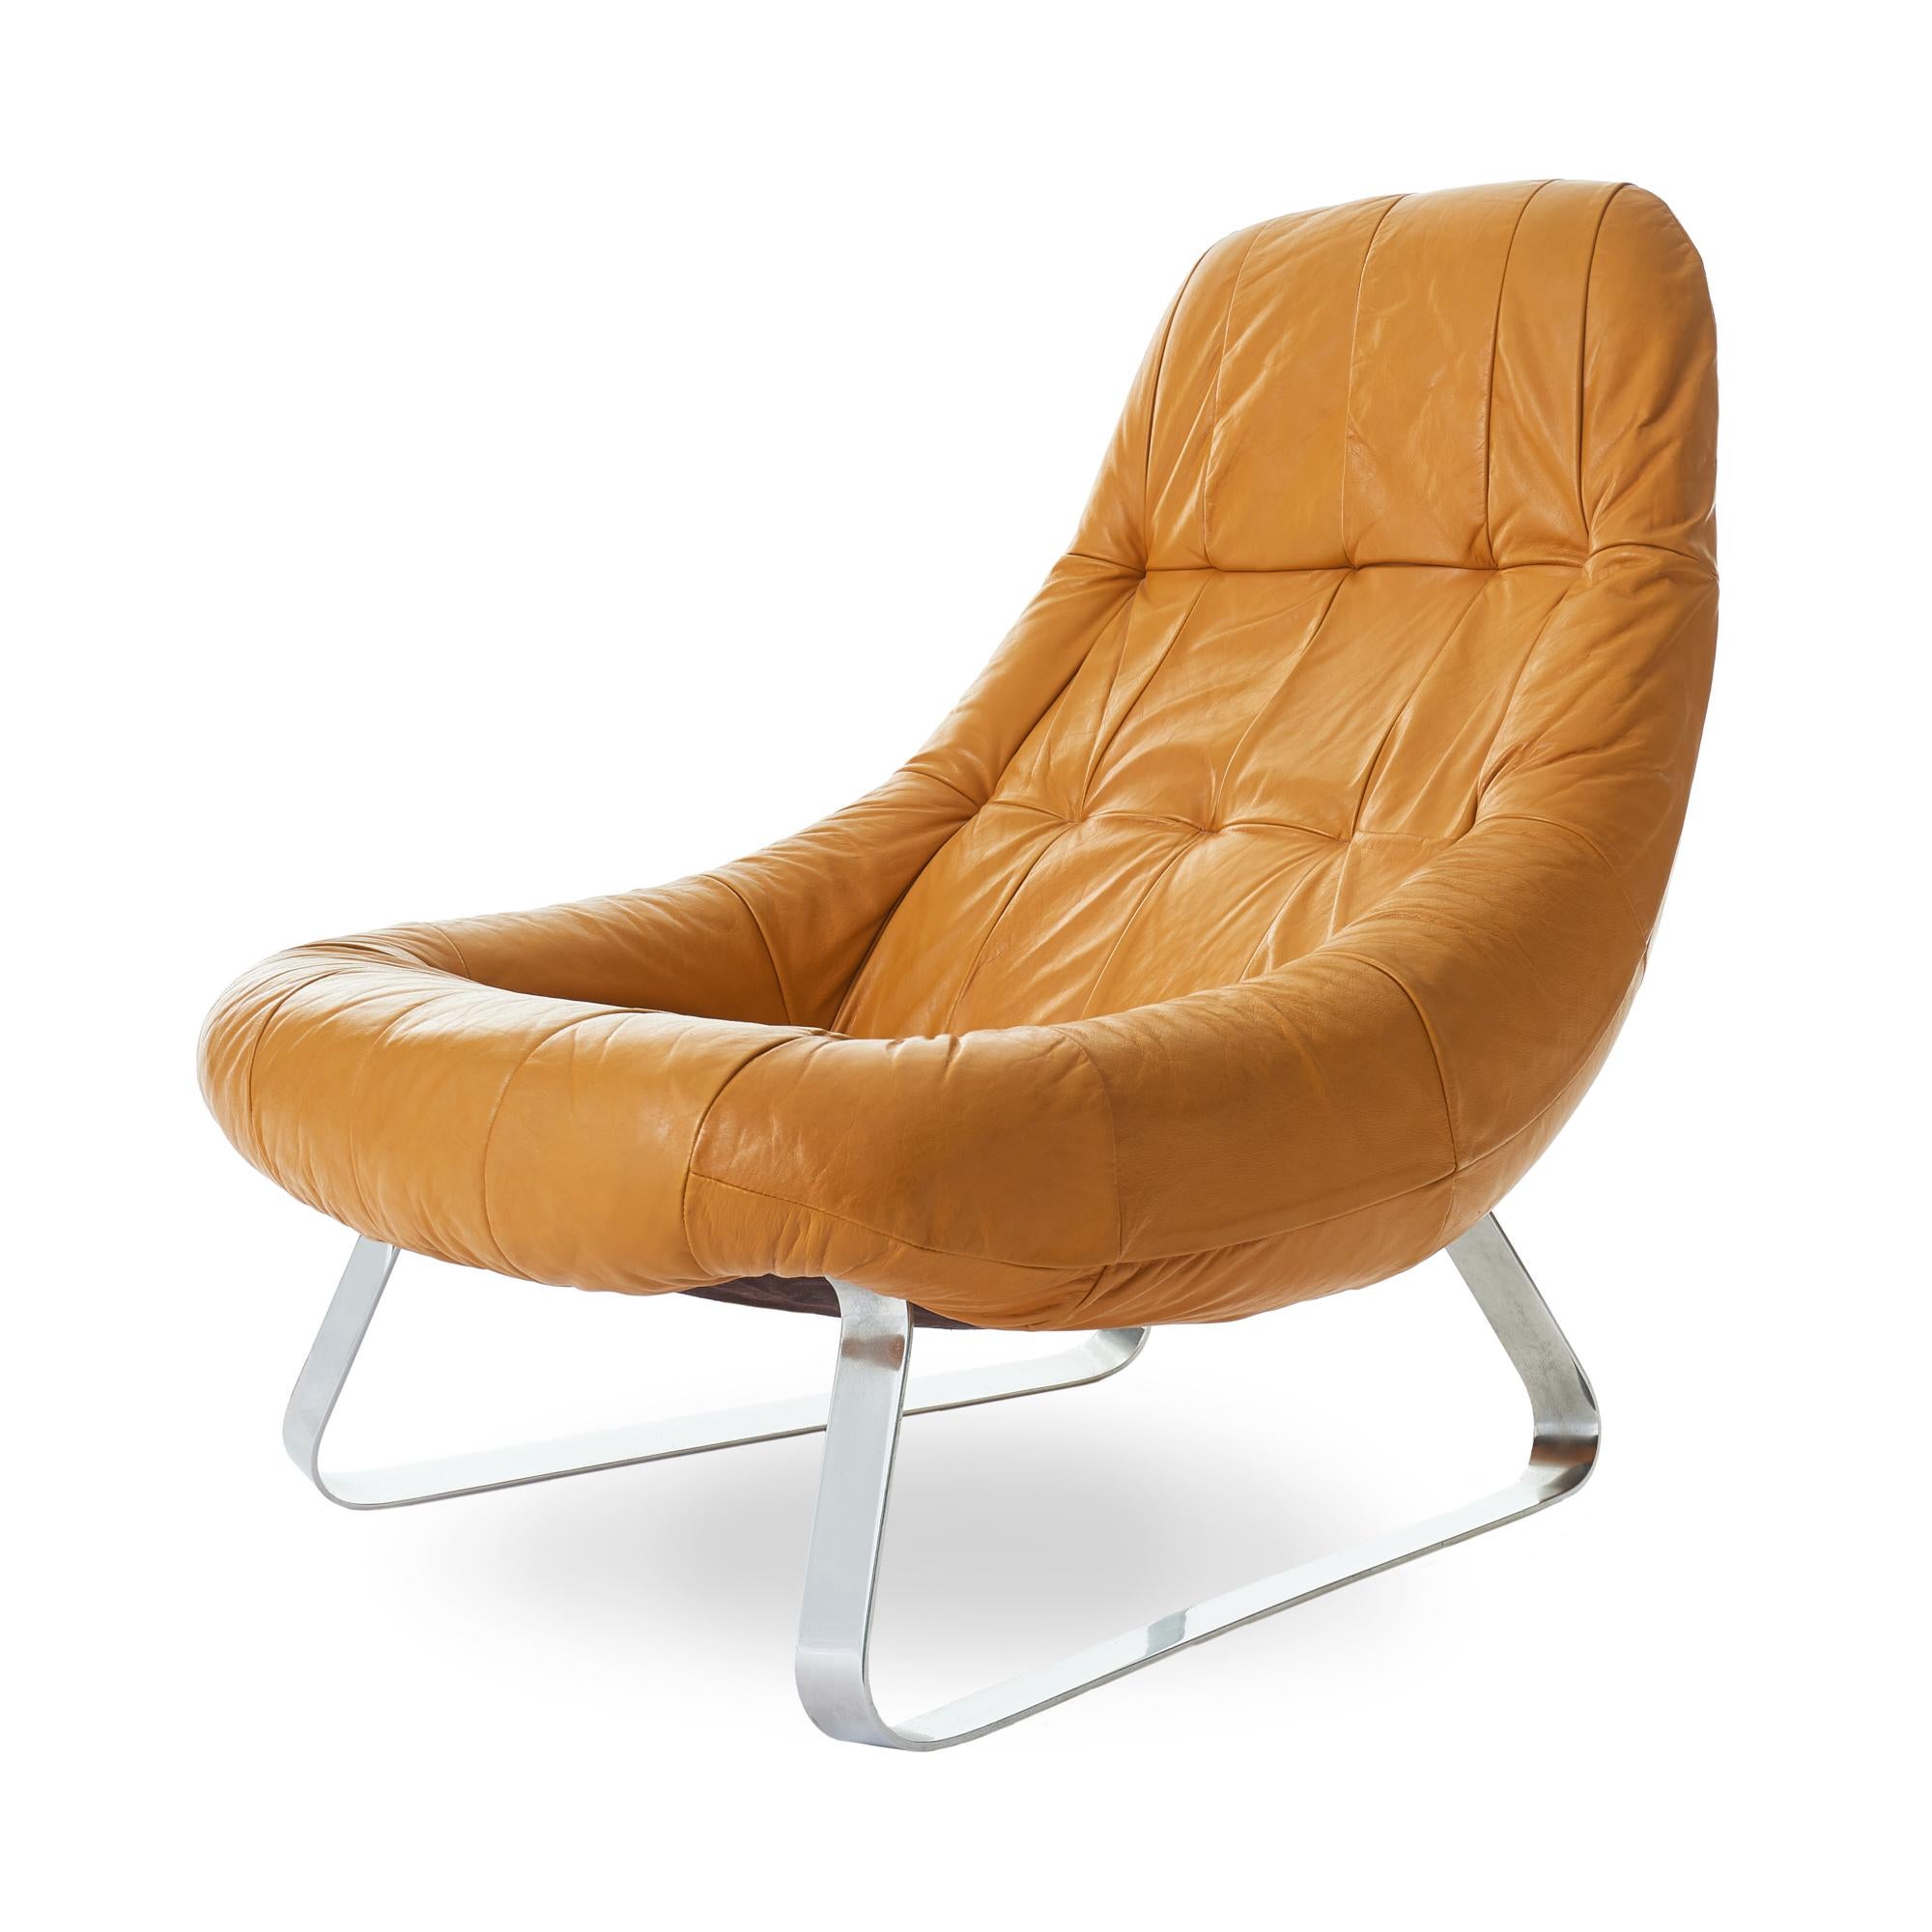 Gorgeous 1970s Percival Lafer Earth (MP-163) lounge chair made in Brazil. Original, perfectly worn in leather upholstery in a caramel color, with coordinating suede panel on back. Chrome sleigh base has been re-stabilized and re-polished, and is